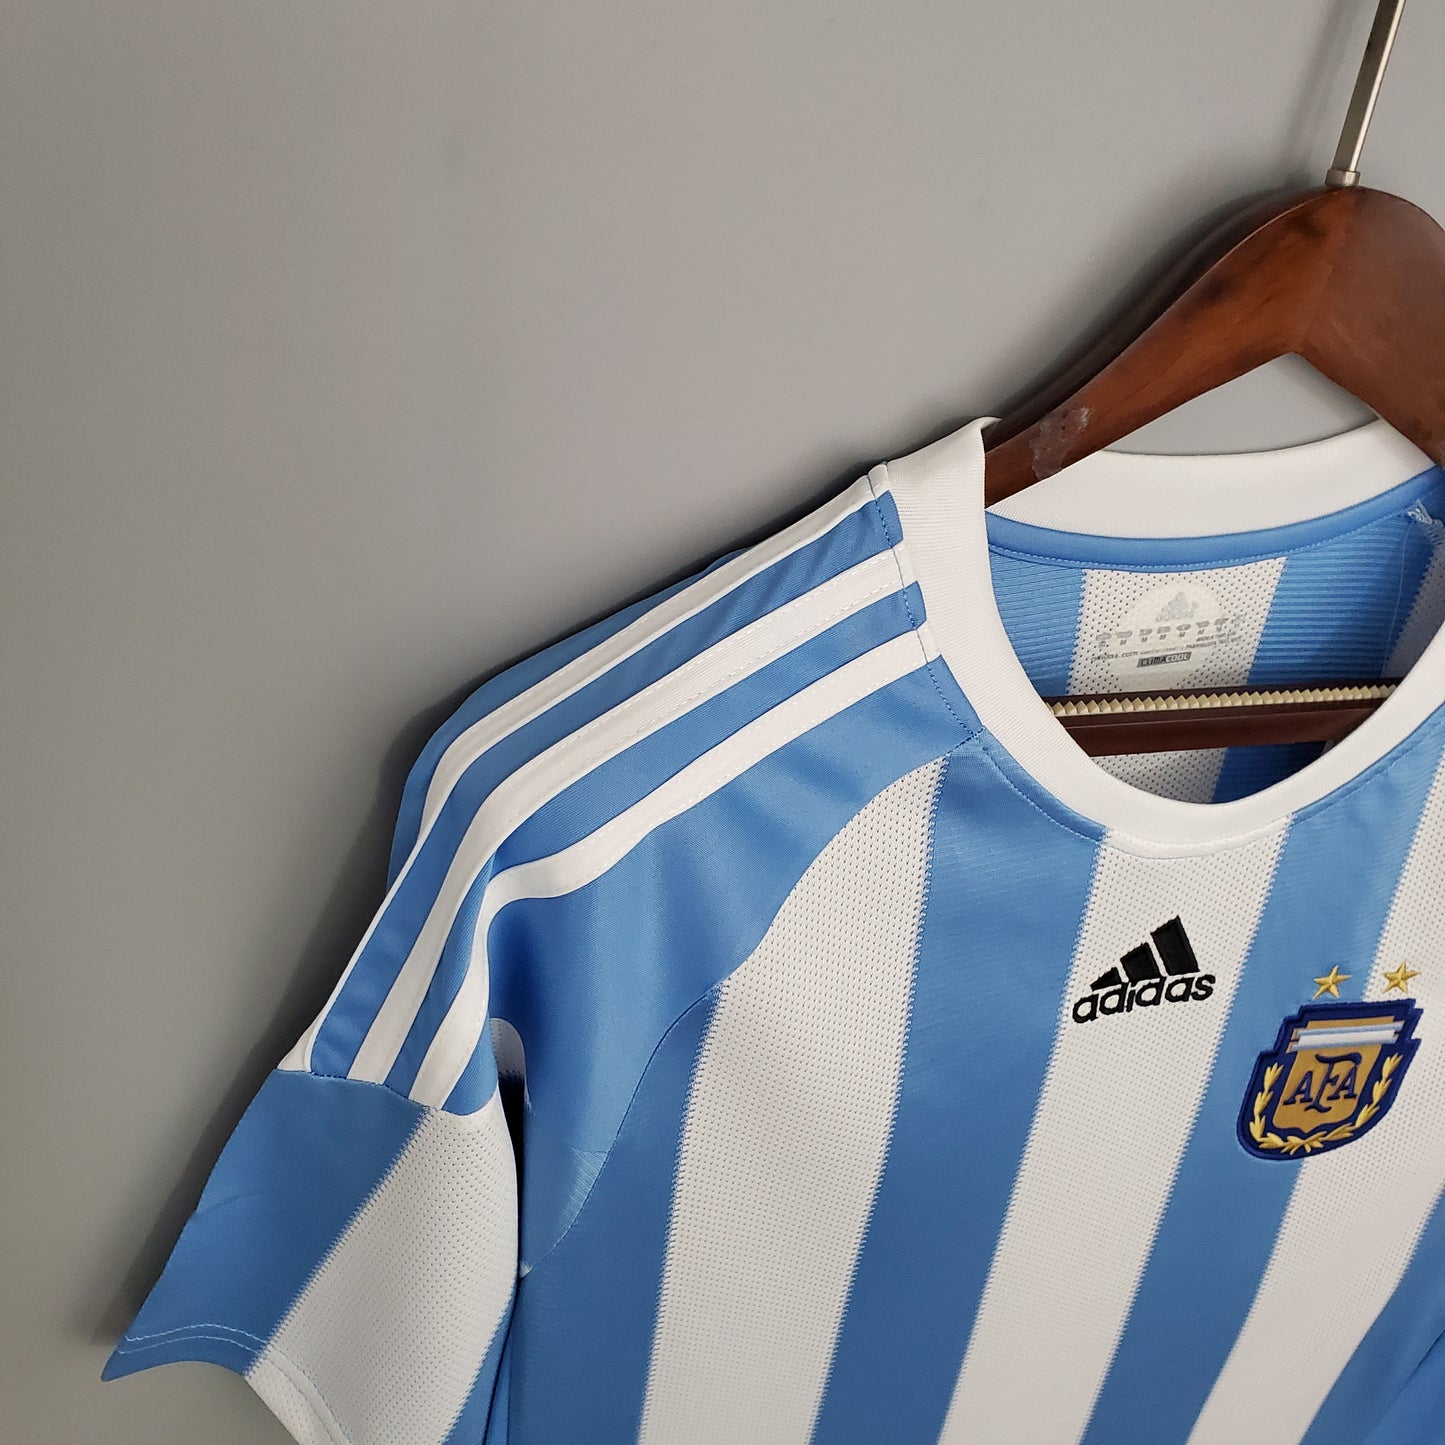 Argentina 2010 Home Jersey